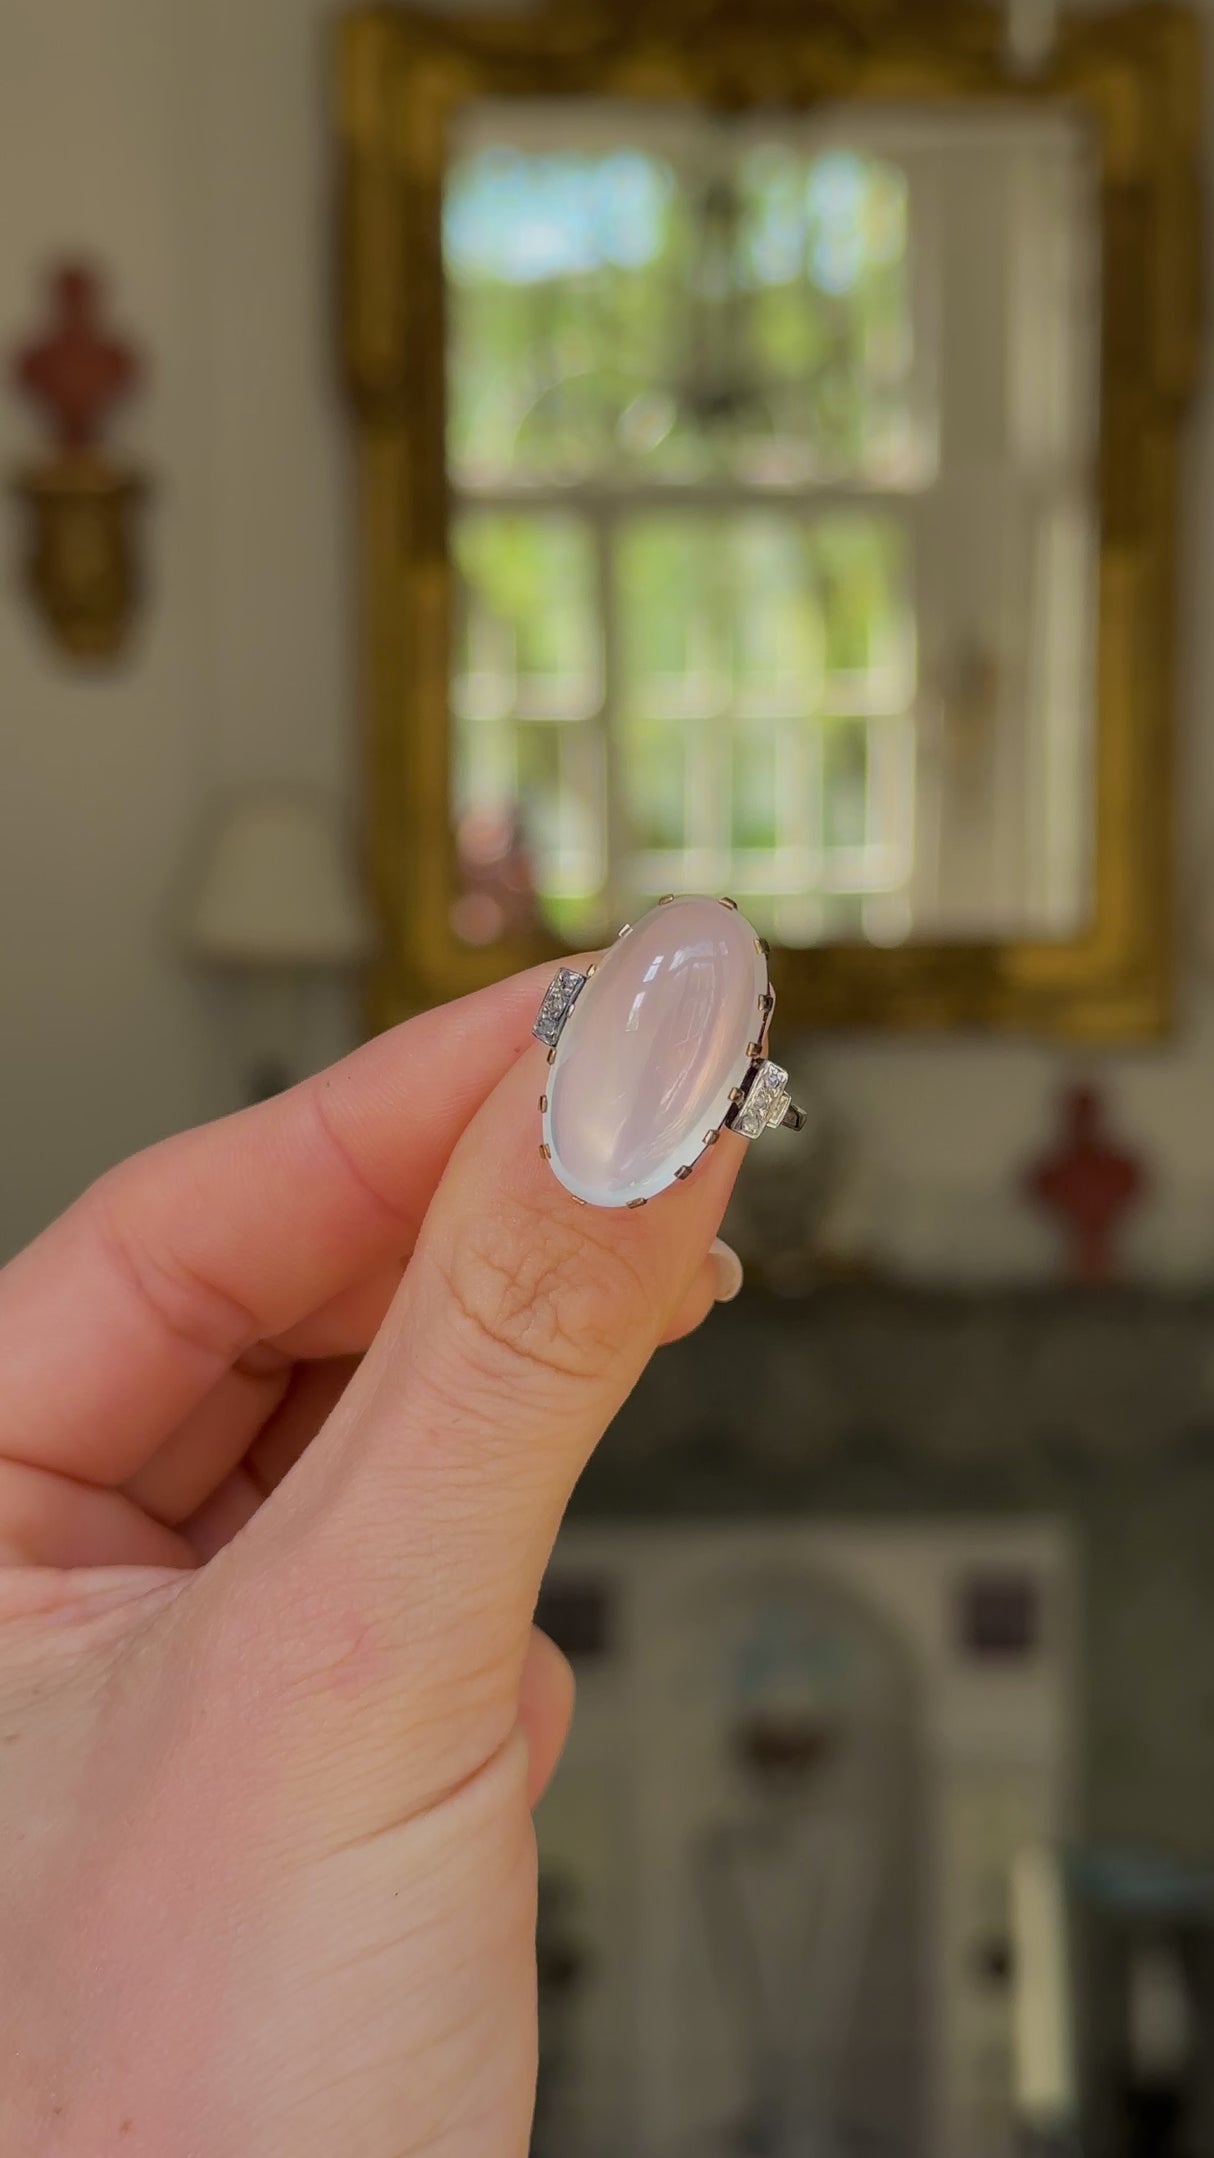 Moonstone and diamond ring, held in fingers and moved around to give perspective.